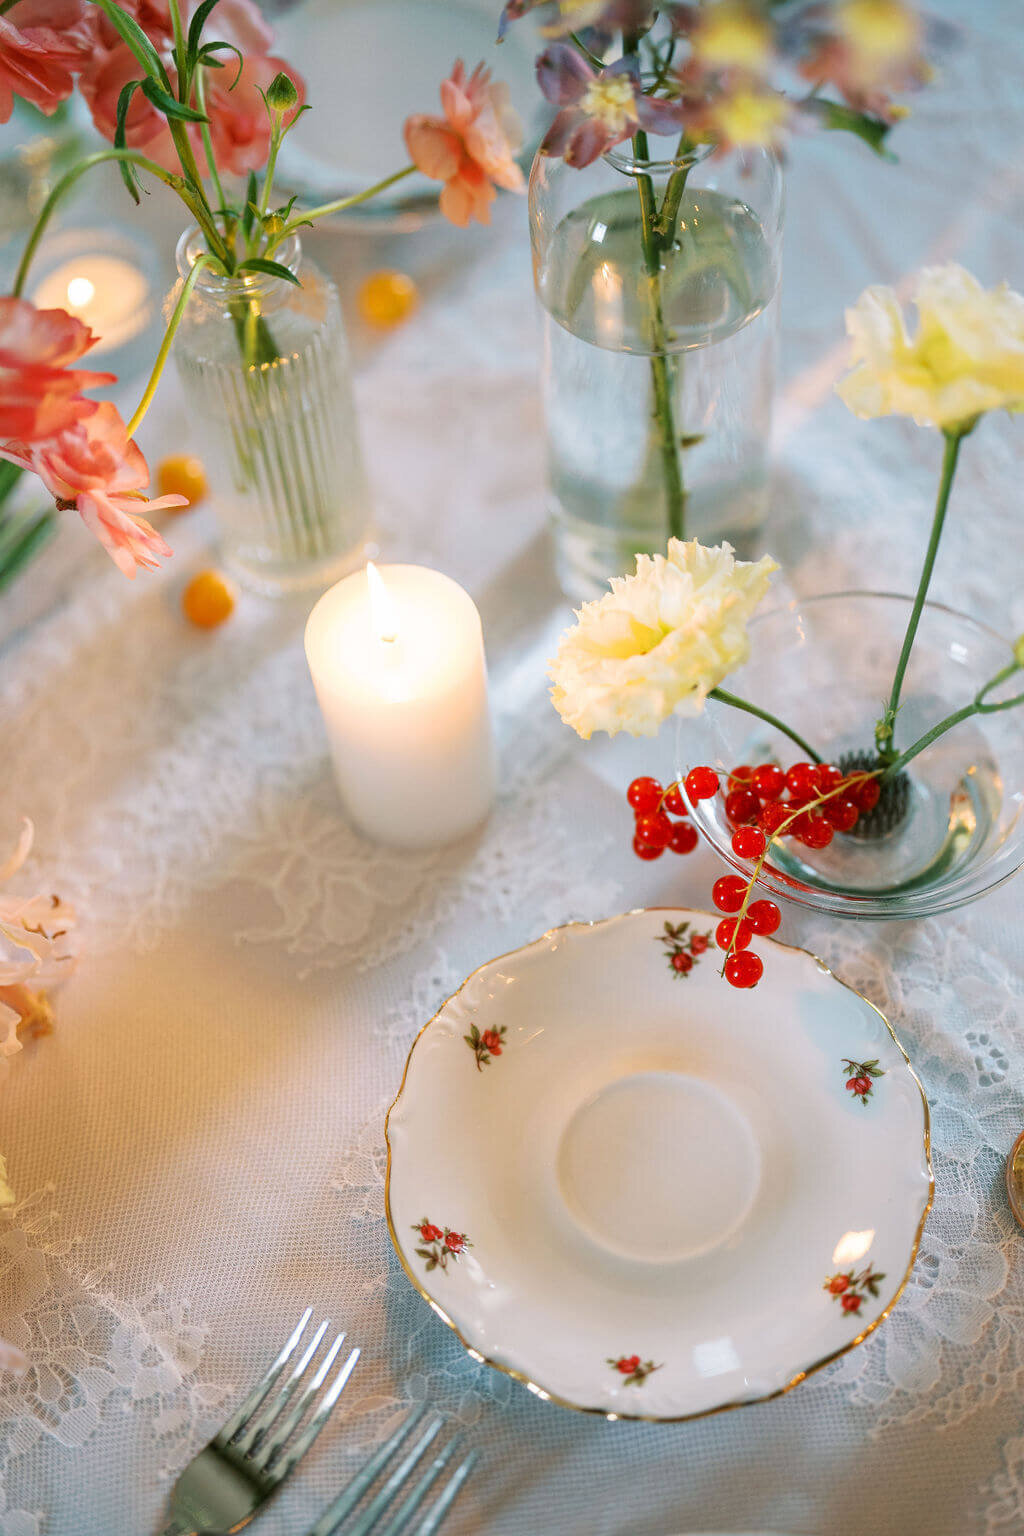 Vintage flatware and plates with red and white flowers